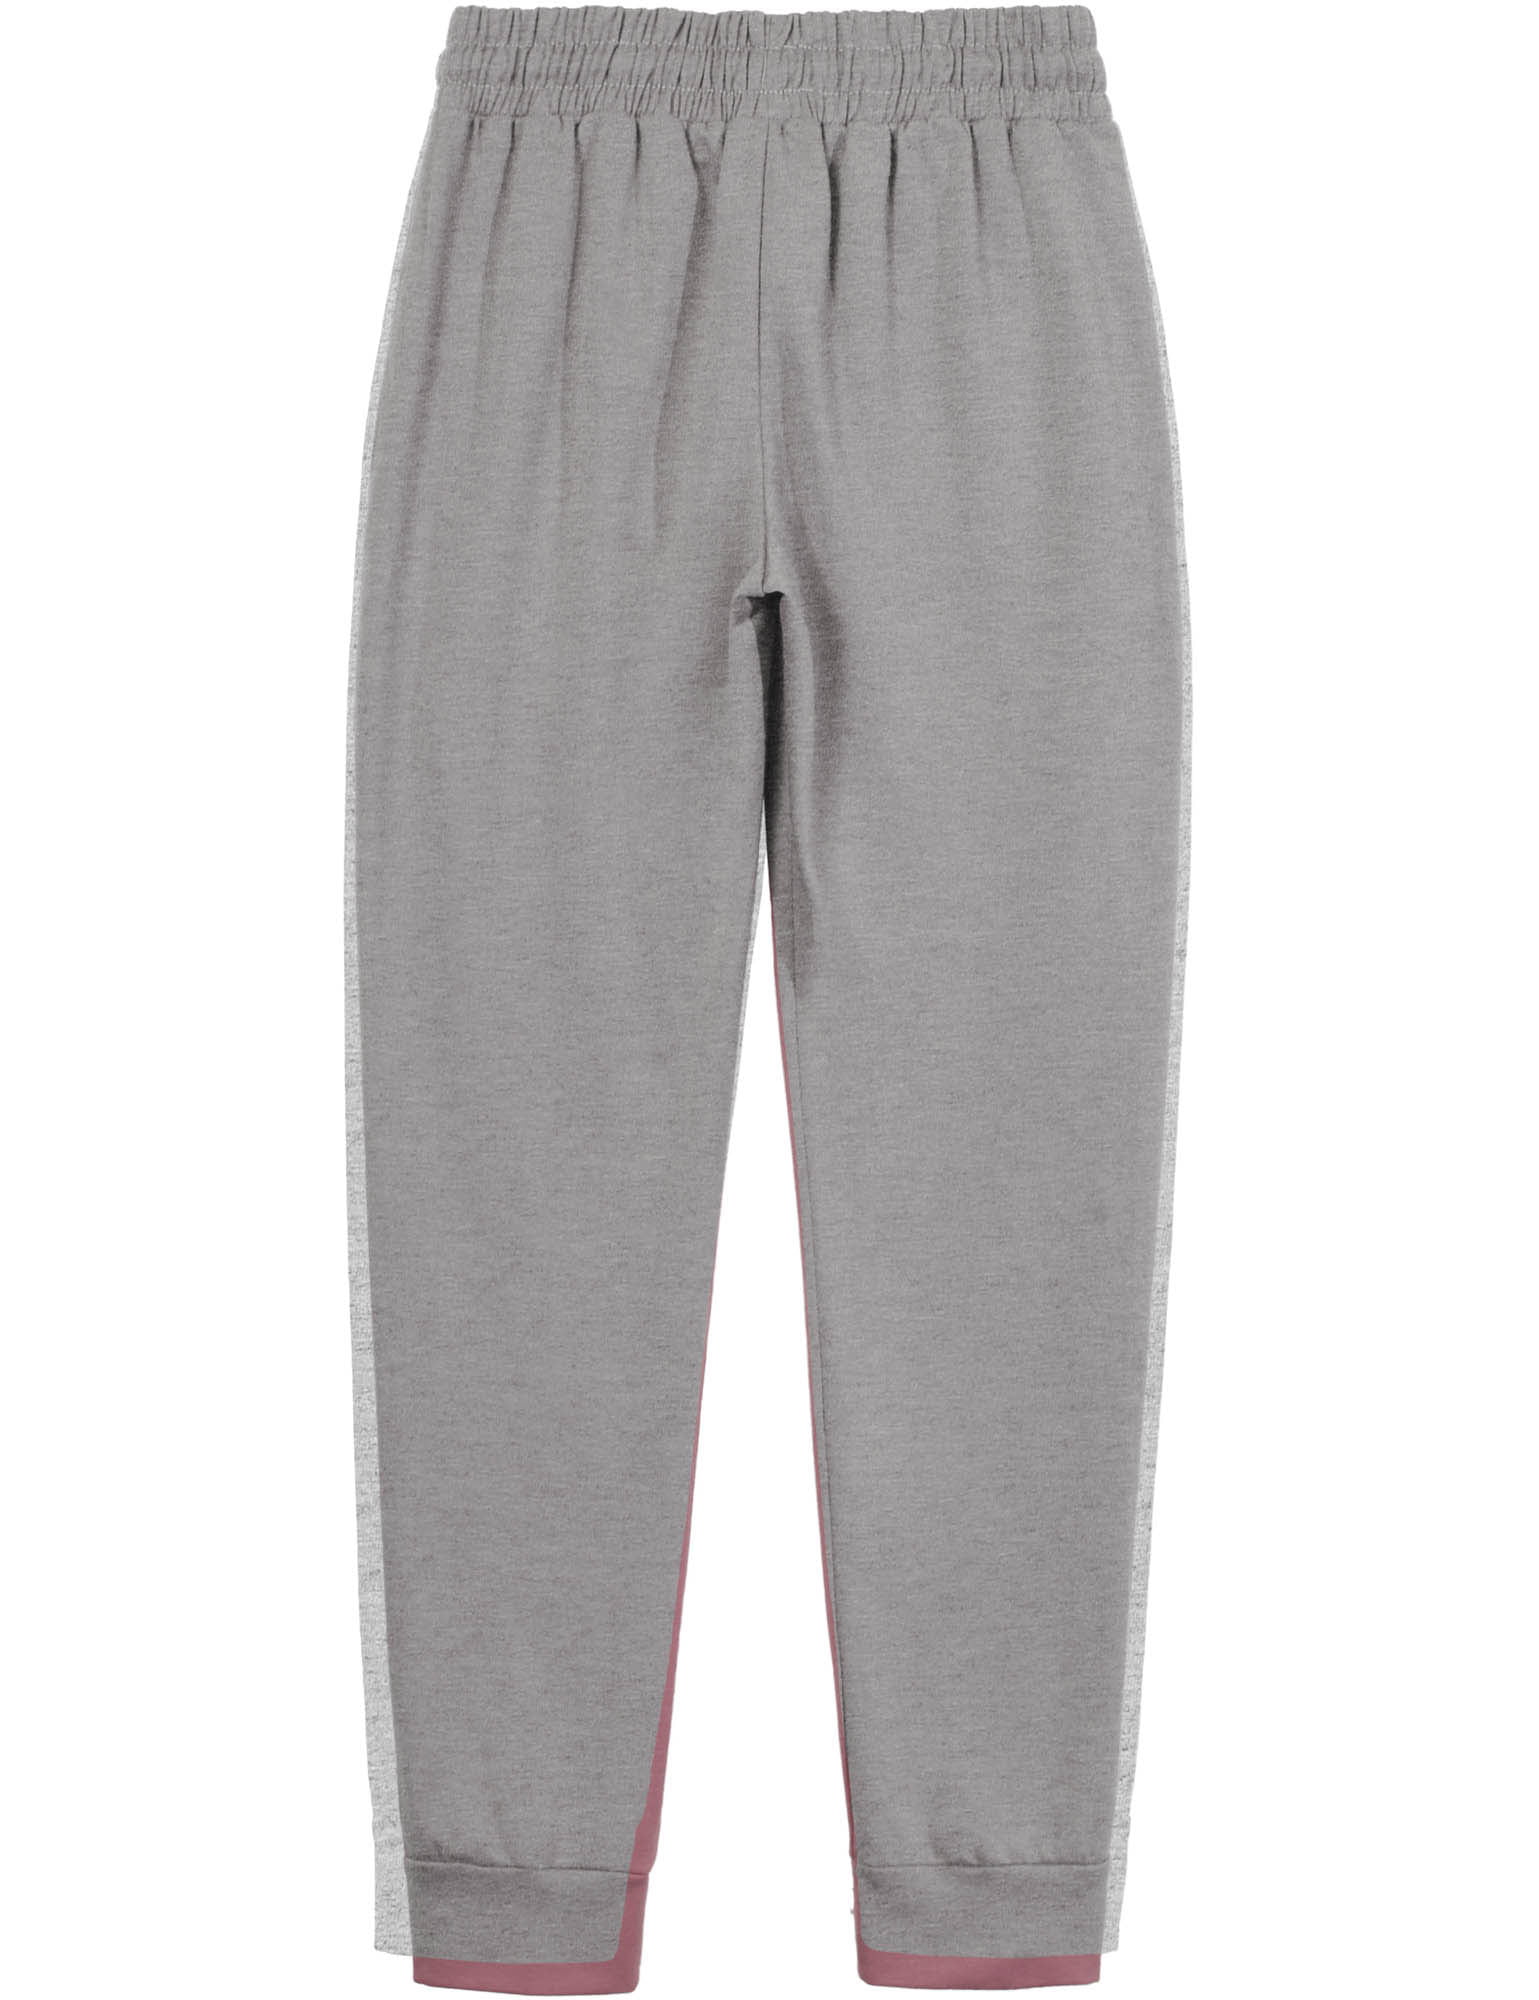  Joyaria Ladies Joggers Jogging Pants Terry Lightweight  Sweatpants Drawstring Stretchy Cotton with Pockets (Light Gray,Small) :  Sports & Outdoors